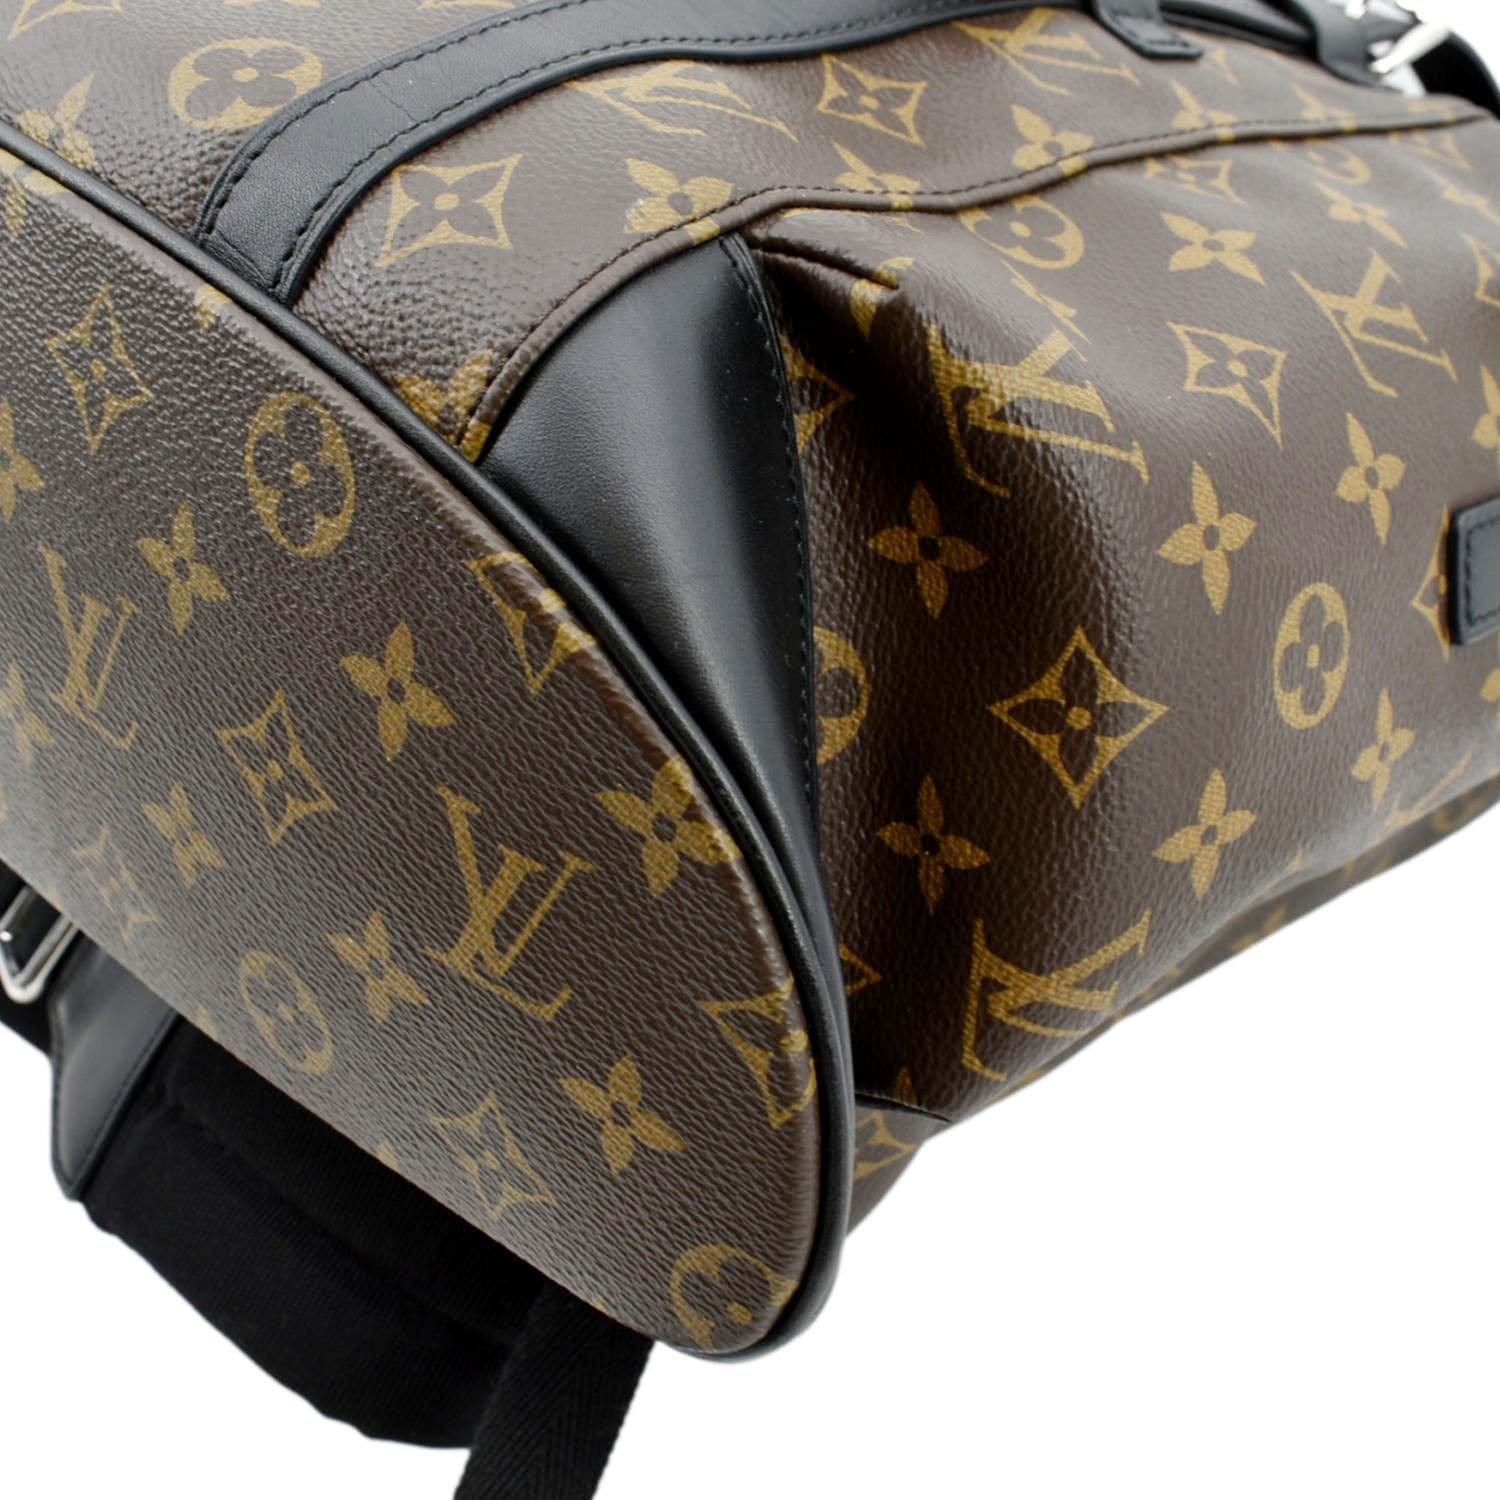 Christopher Backpack Monogram Other Canvas - Bags M20865